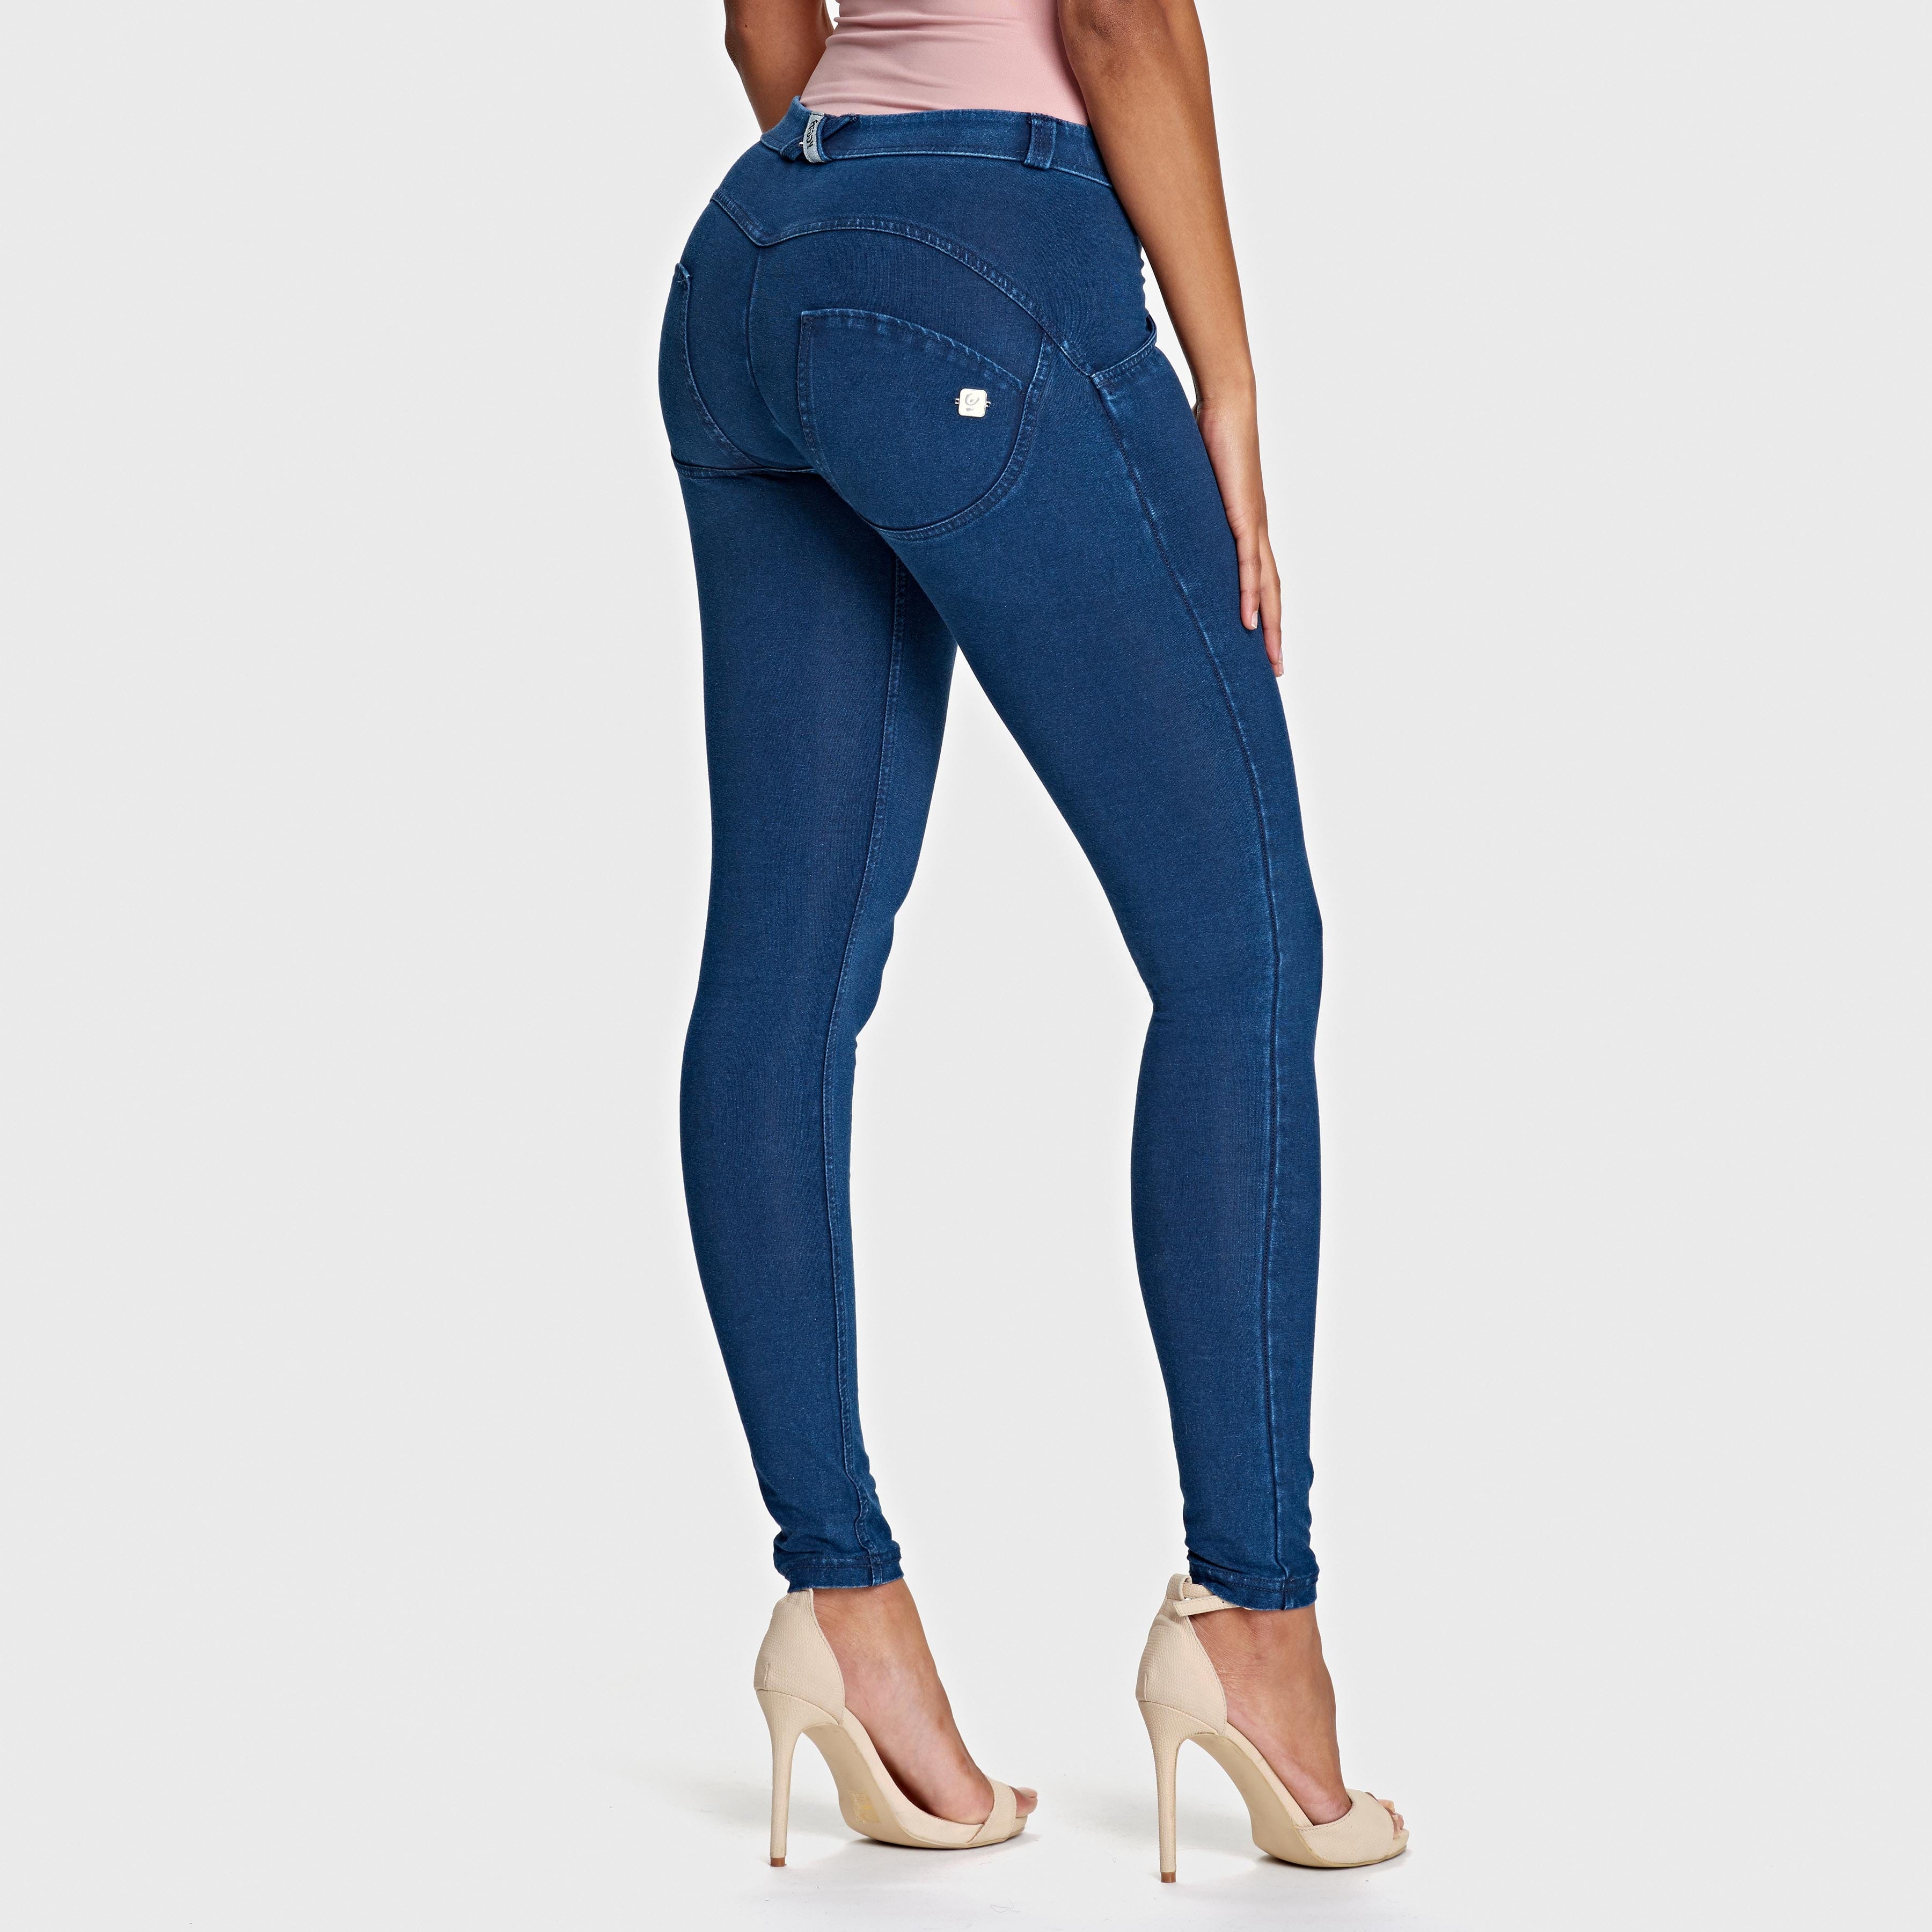 Womens navy blue boutique flare pants with belt loops to take on the trend